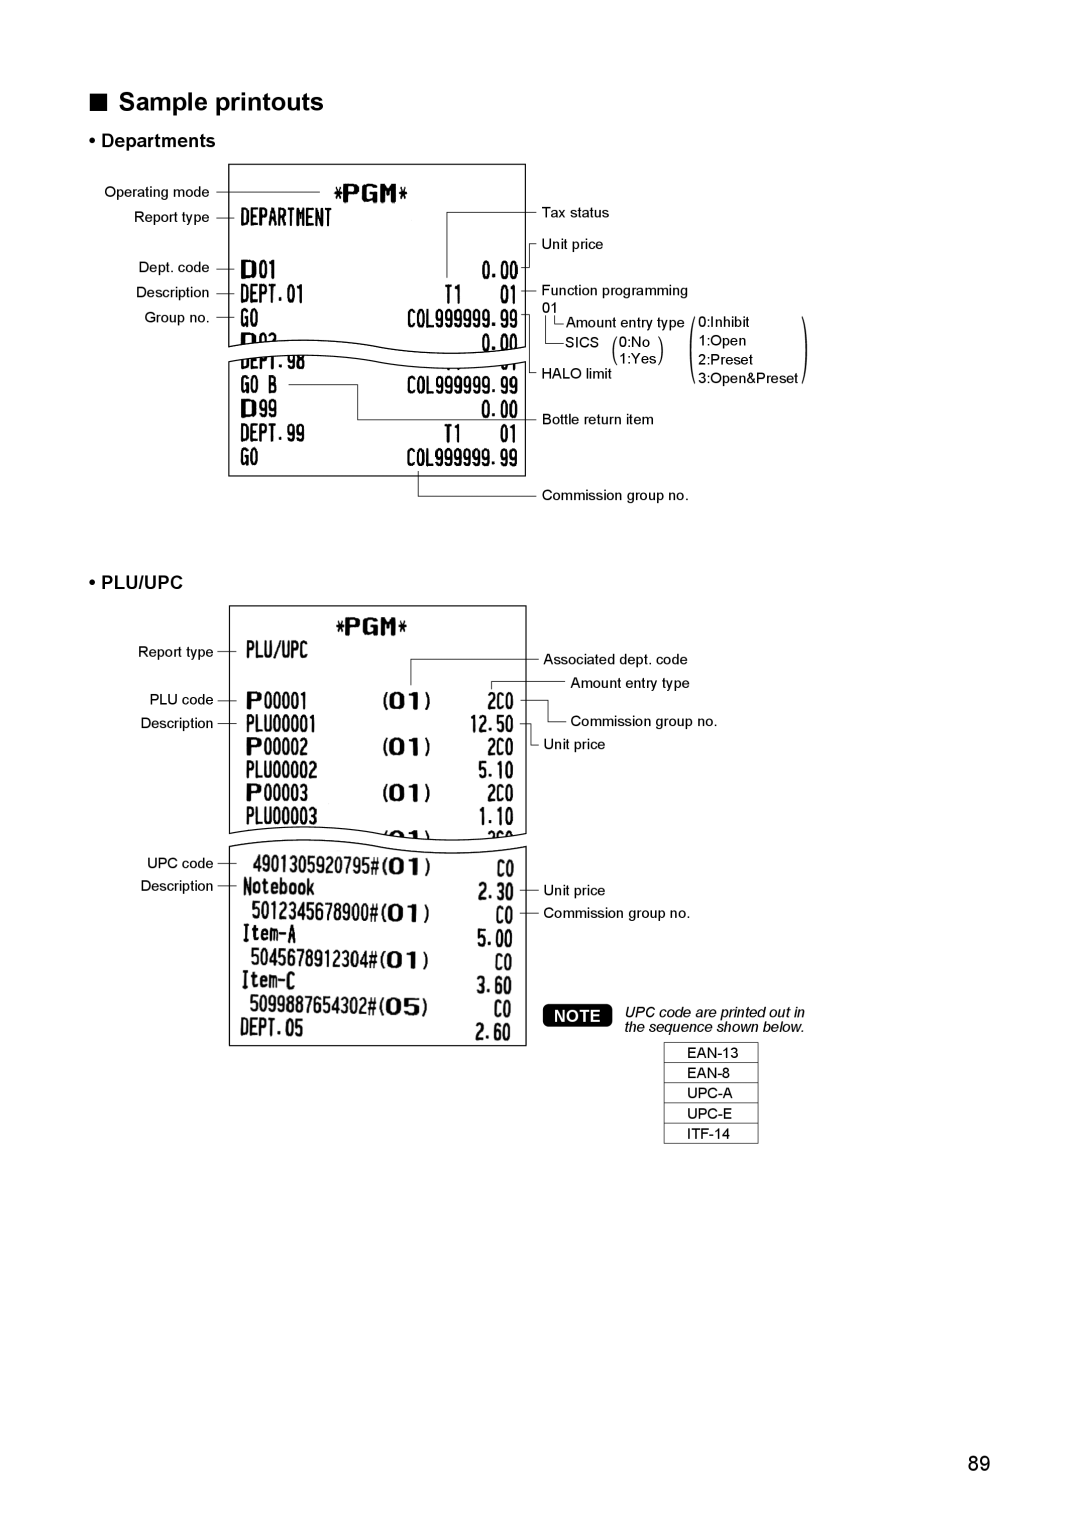 Sharp ER-A347A instruction manual Sample printouts, UPC code are printed out in, EAN-13, EAN-8, Upc-A, Upc-E, ITF-14 